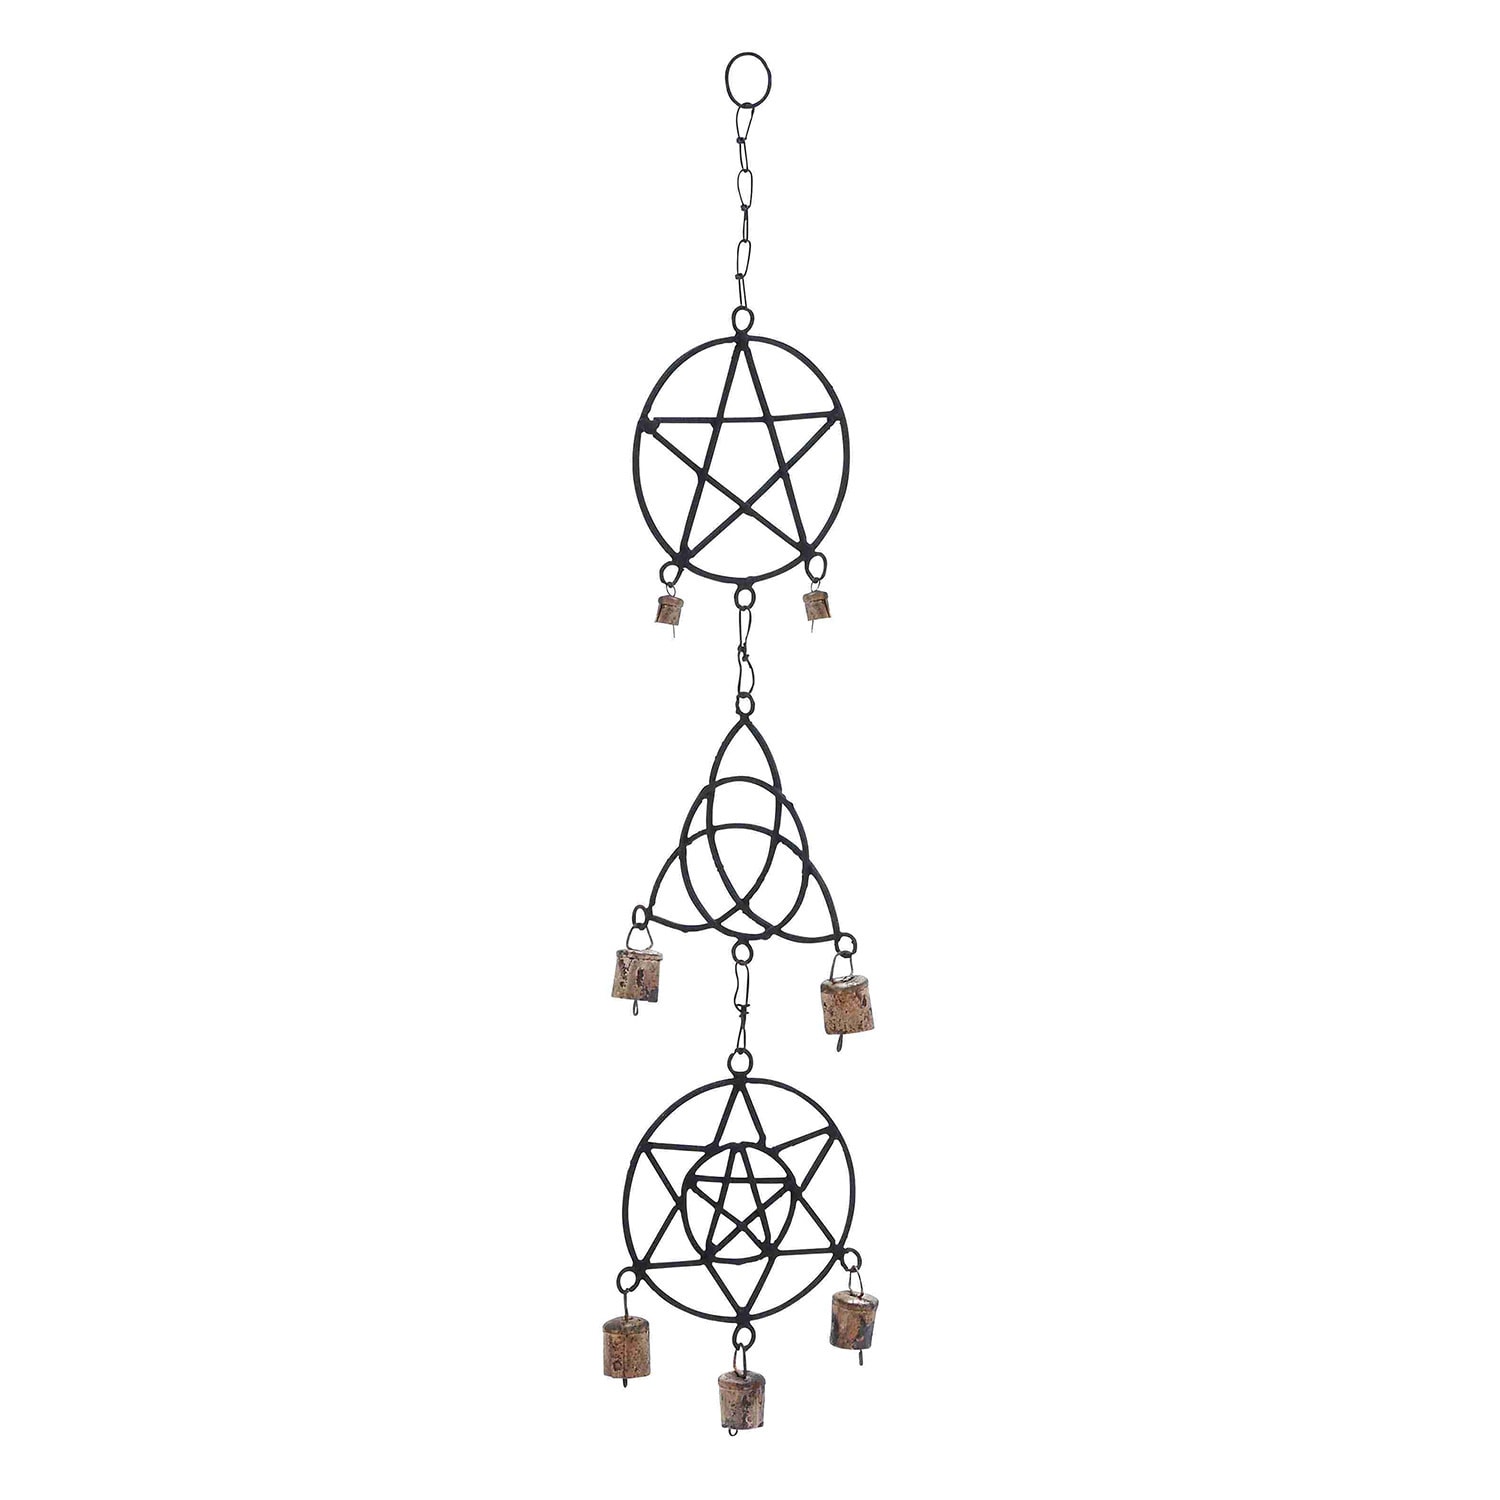 Abstract Metal Wind Chime